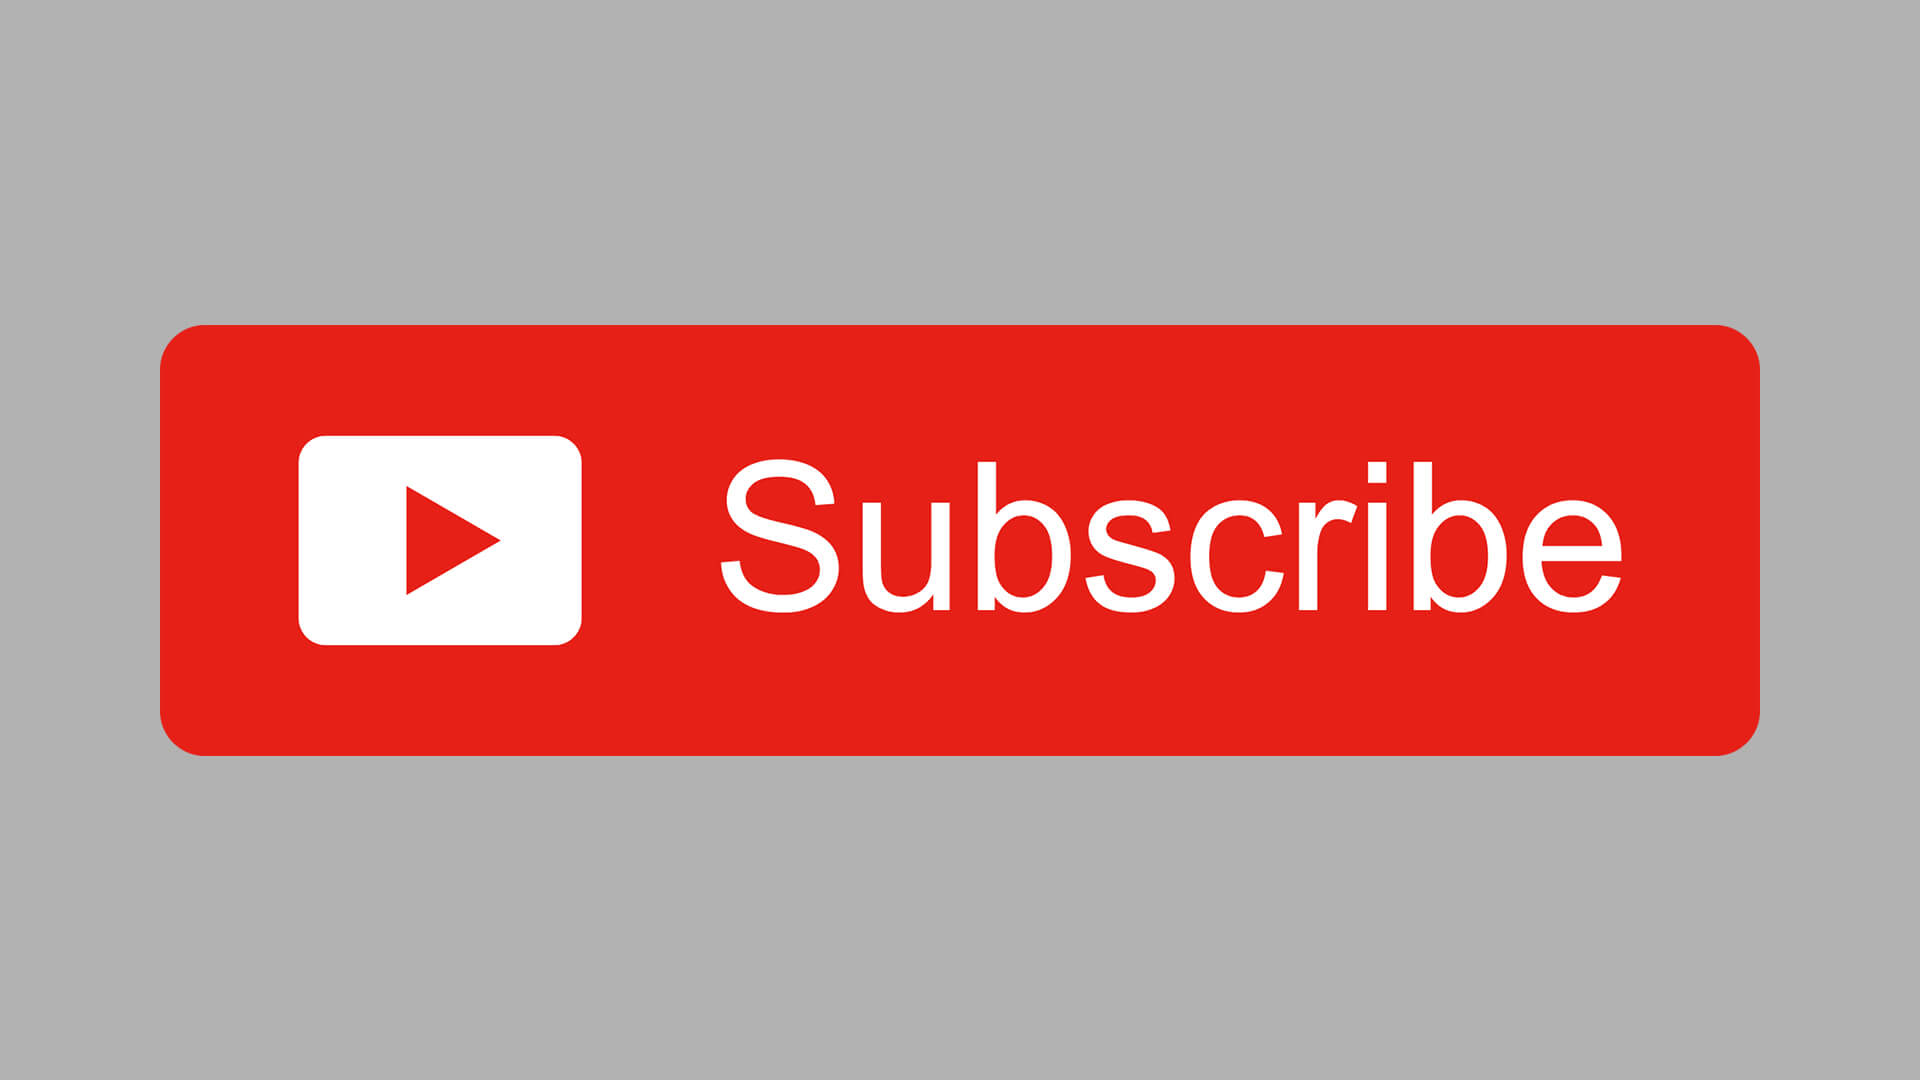 Free YouTube Subscribe Button Download Design Inspiration By AlfredoCreates 6 1